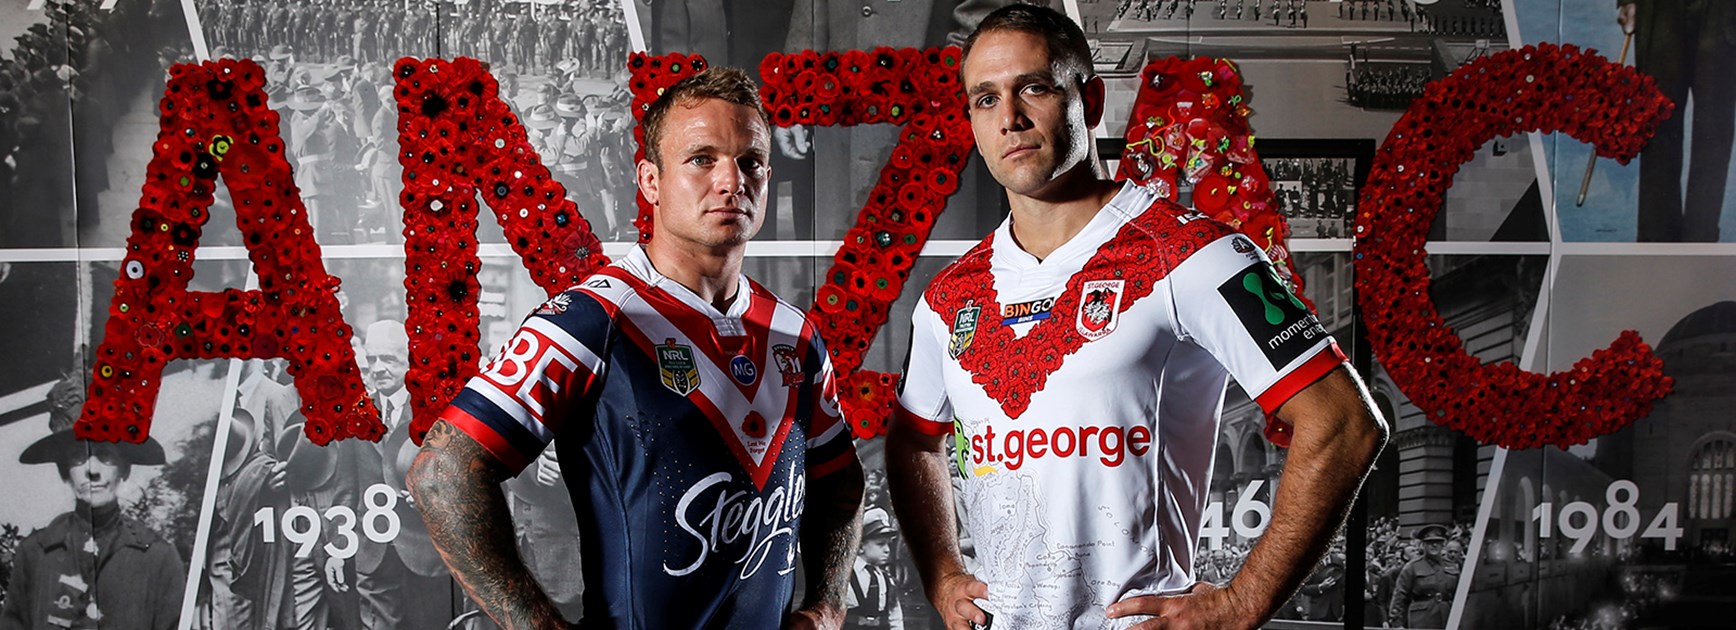 Roosters hooker Jake Friend and Dragons winger Jason Nightingale ahead of the 2017 Anzac Day match.